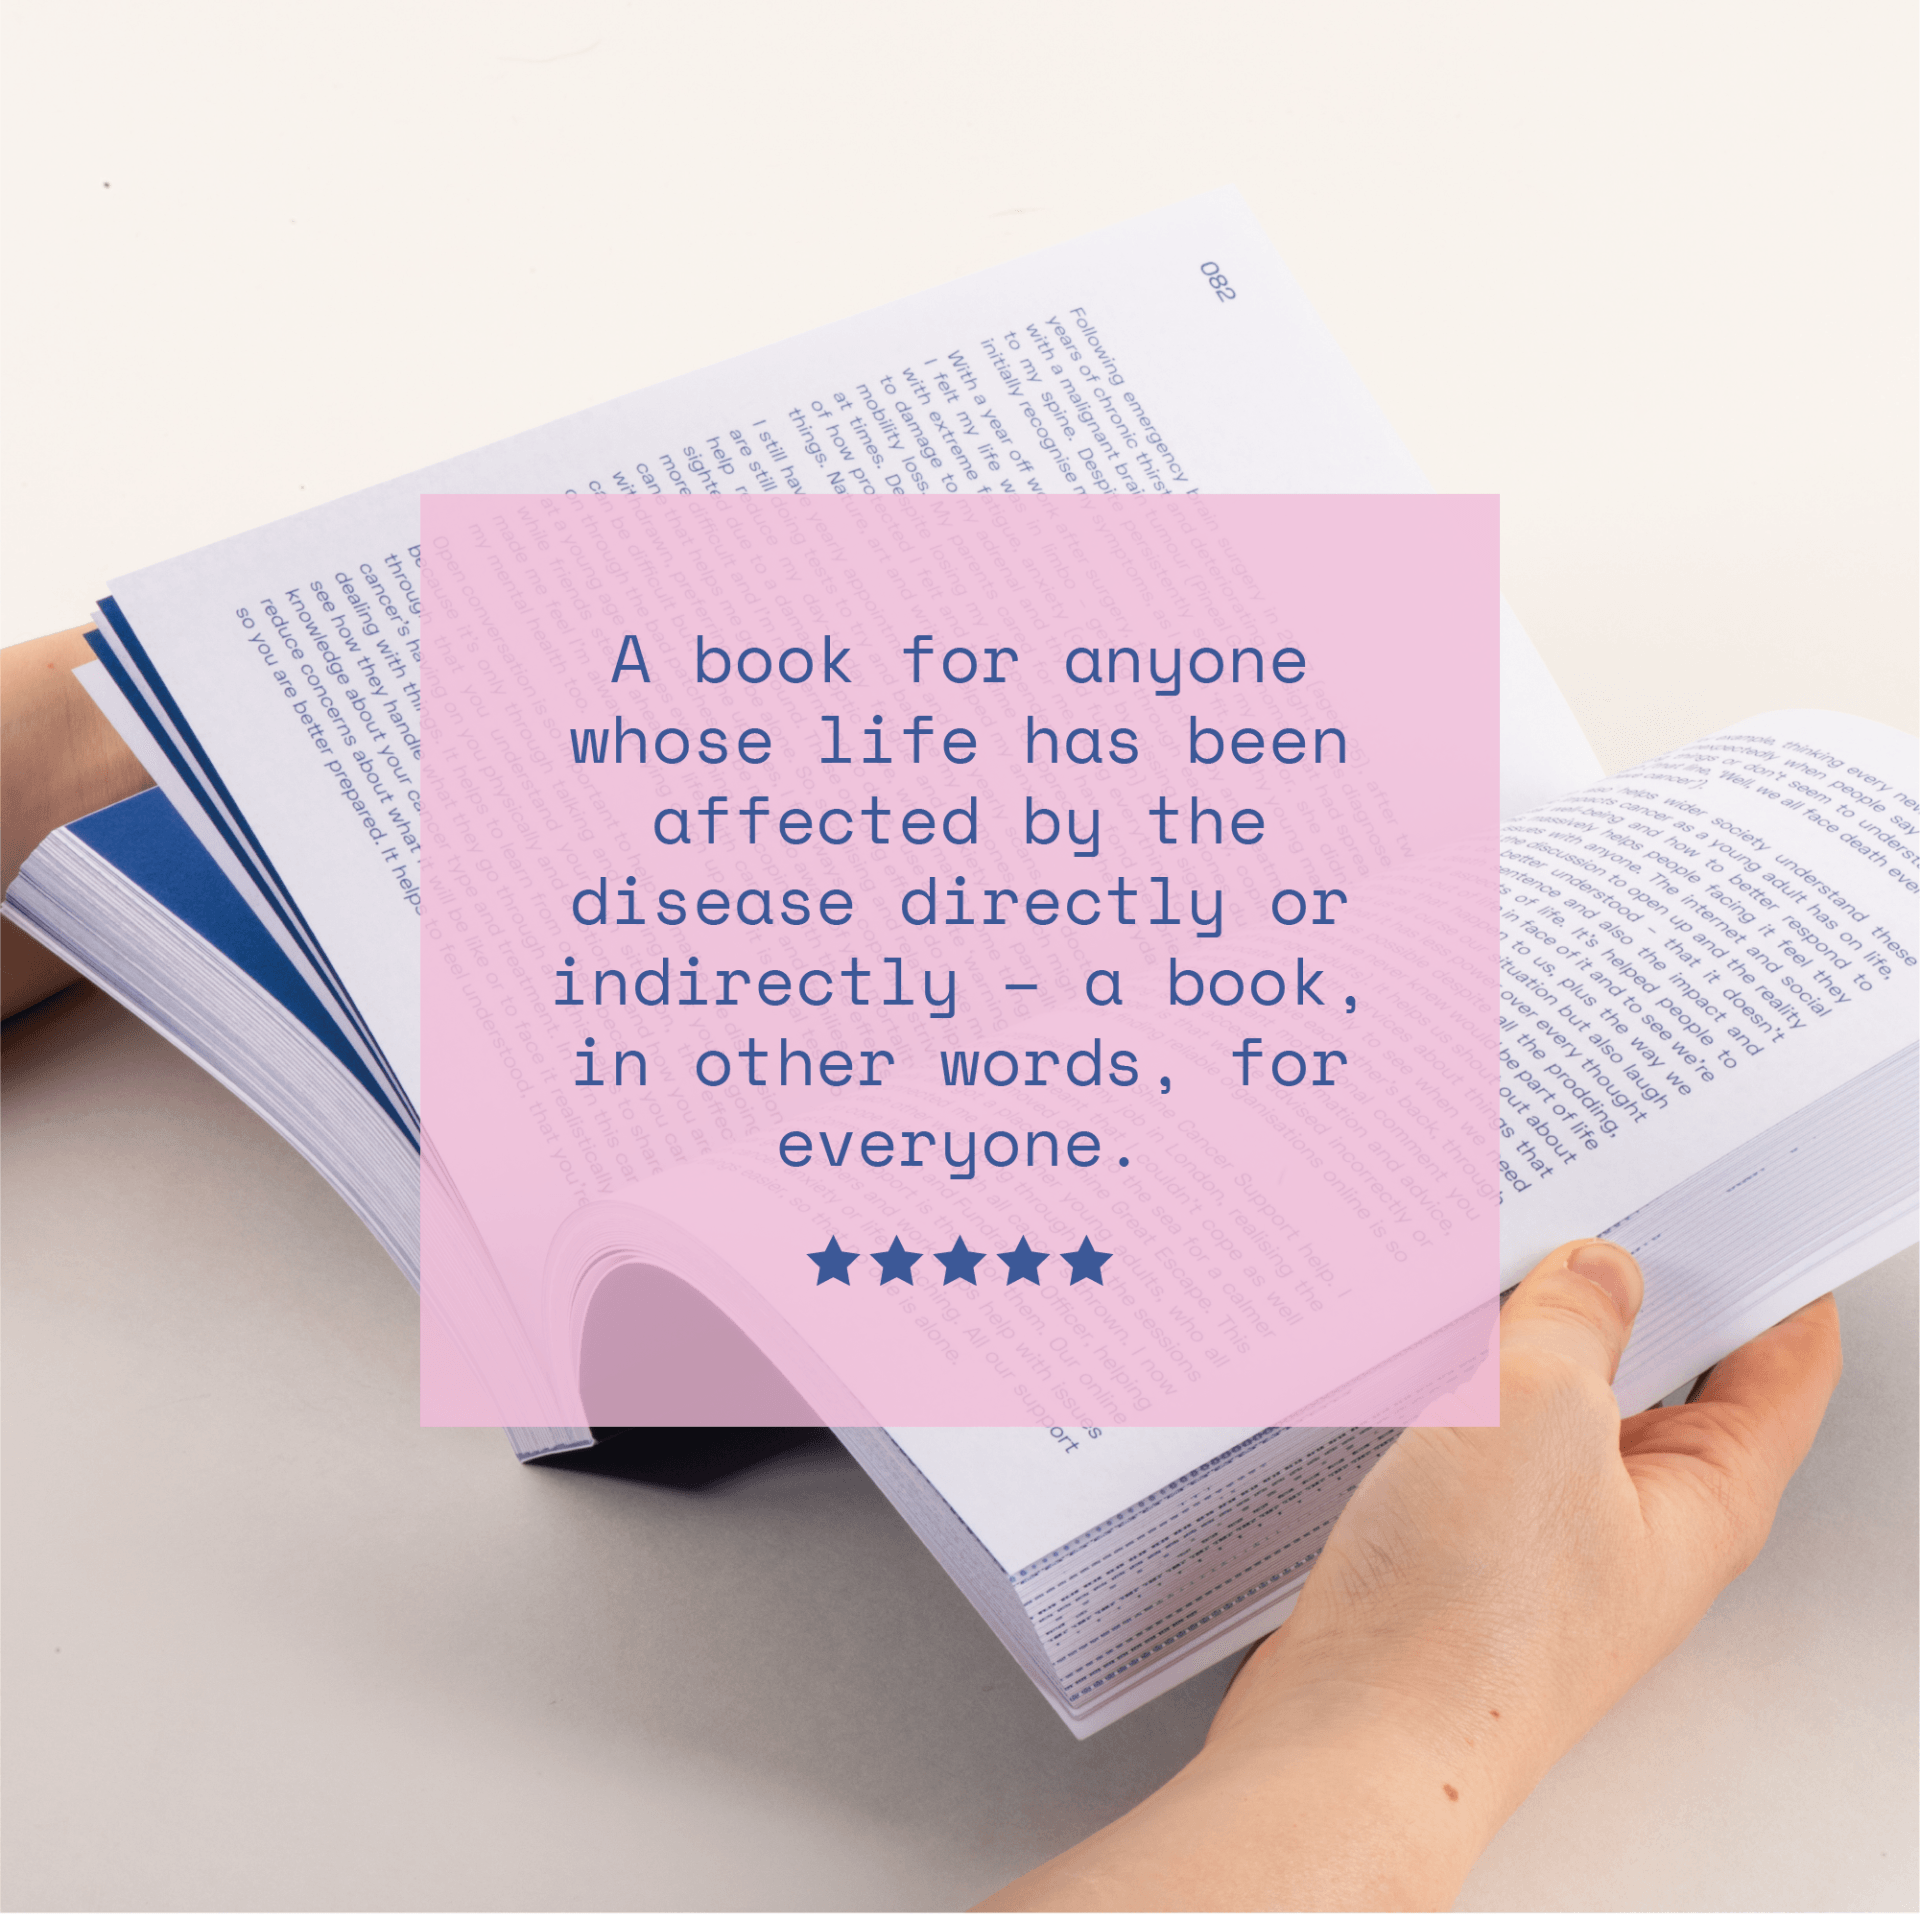 A picture of the 100 stories book with a quote that reads A book for anyone whose life has been affected by the disease (cancer) directly or indirectly - a book, in other words, for everyone affected by cancer